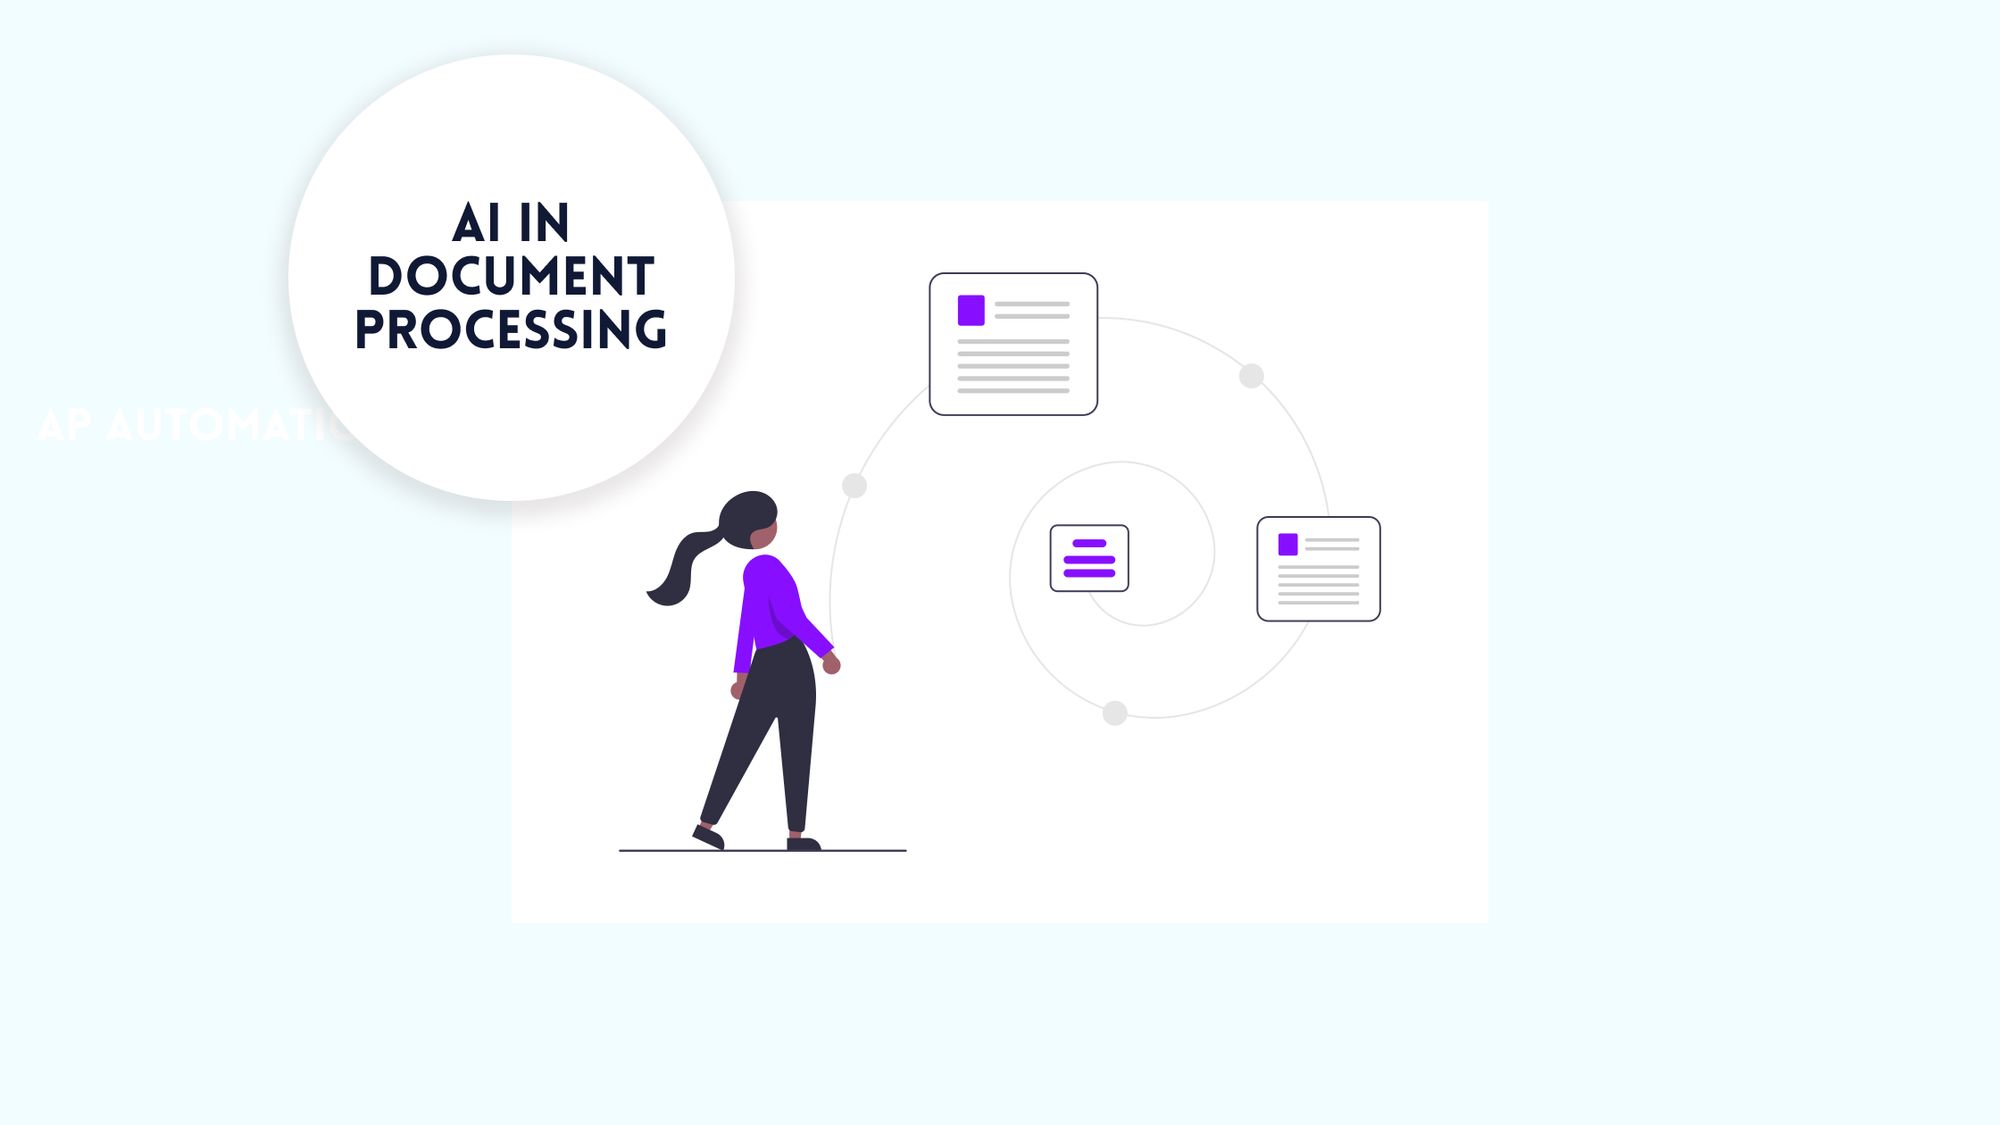 Application of AI in document processing